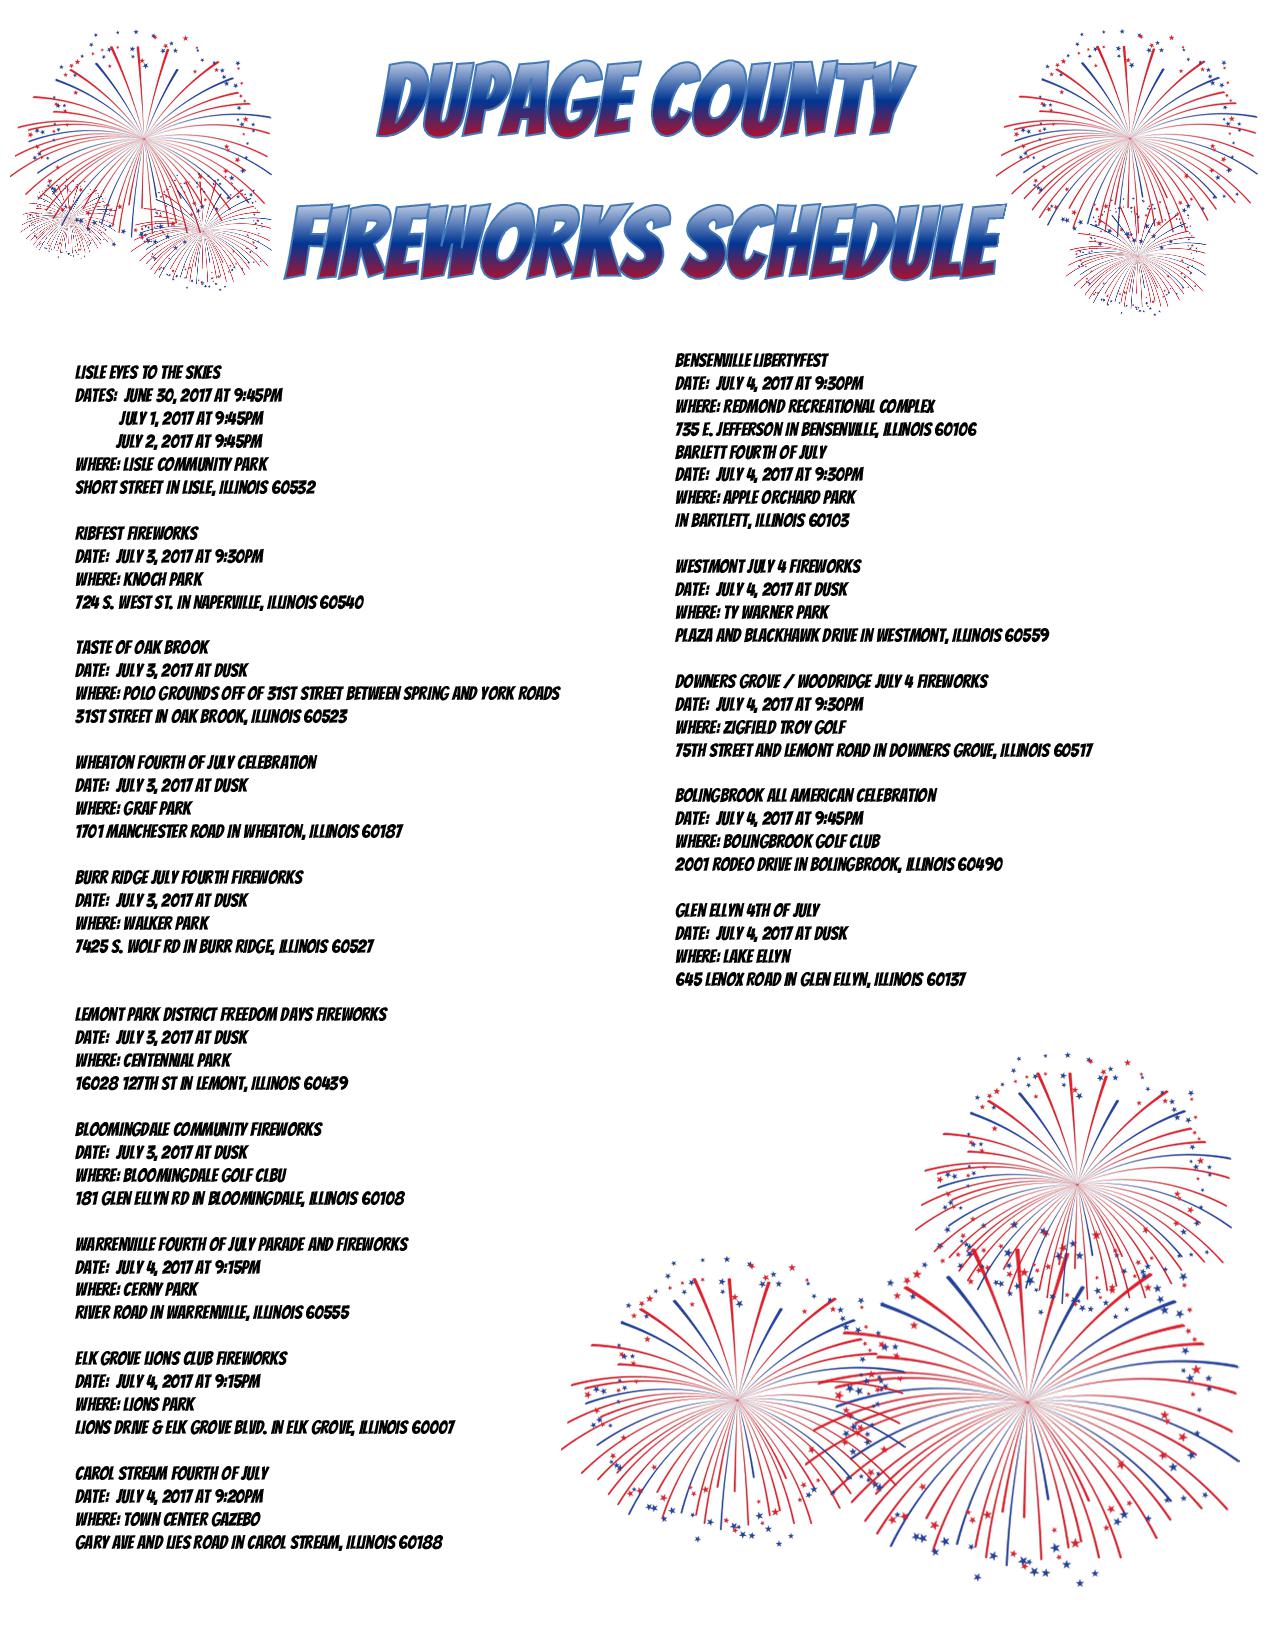 Fireworks Schedules for DuPage and McHenry County Merlak Tax Advisory